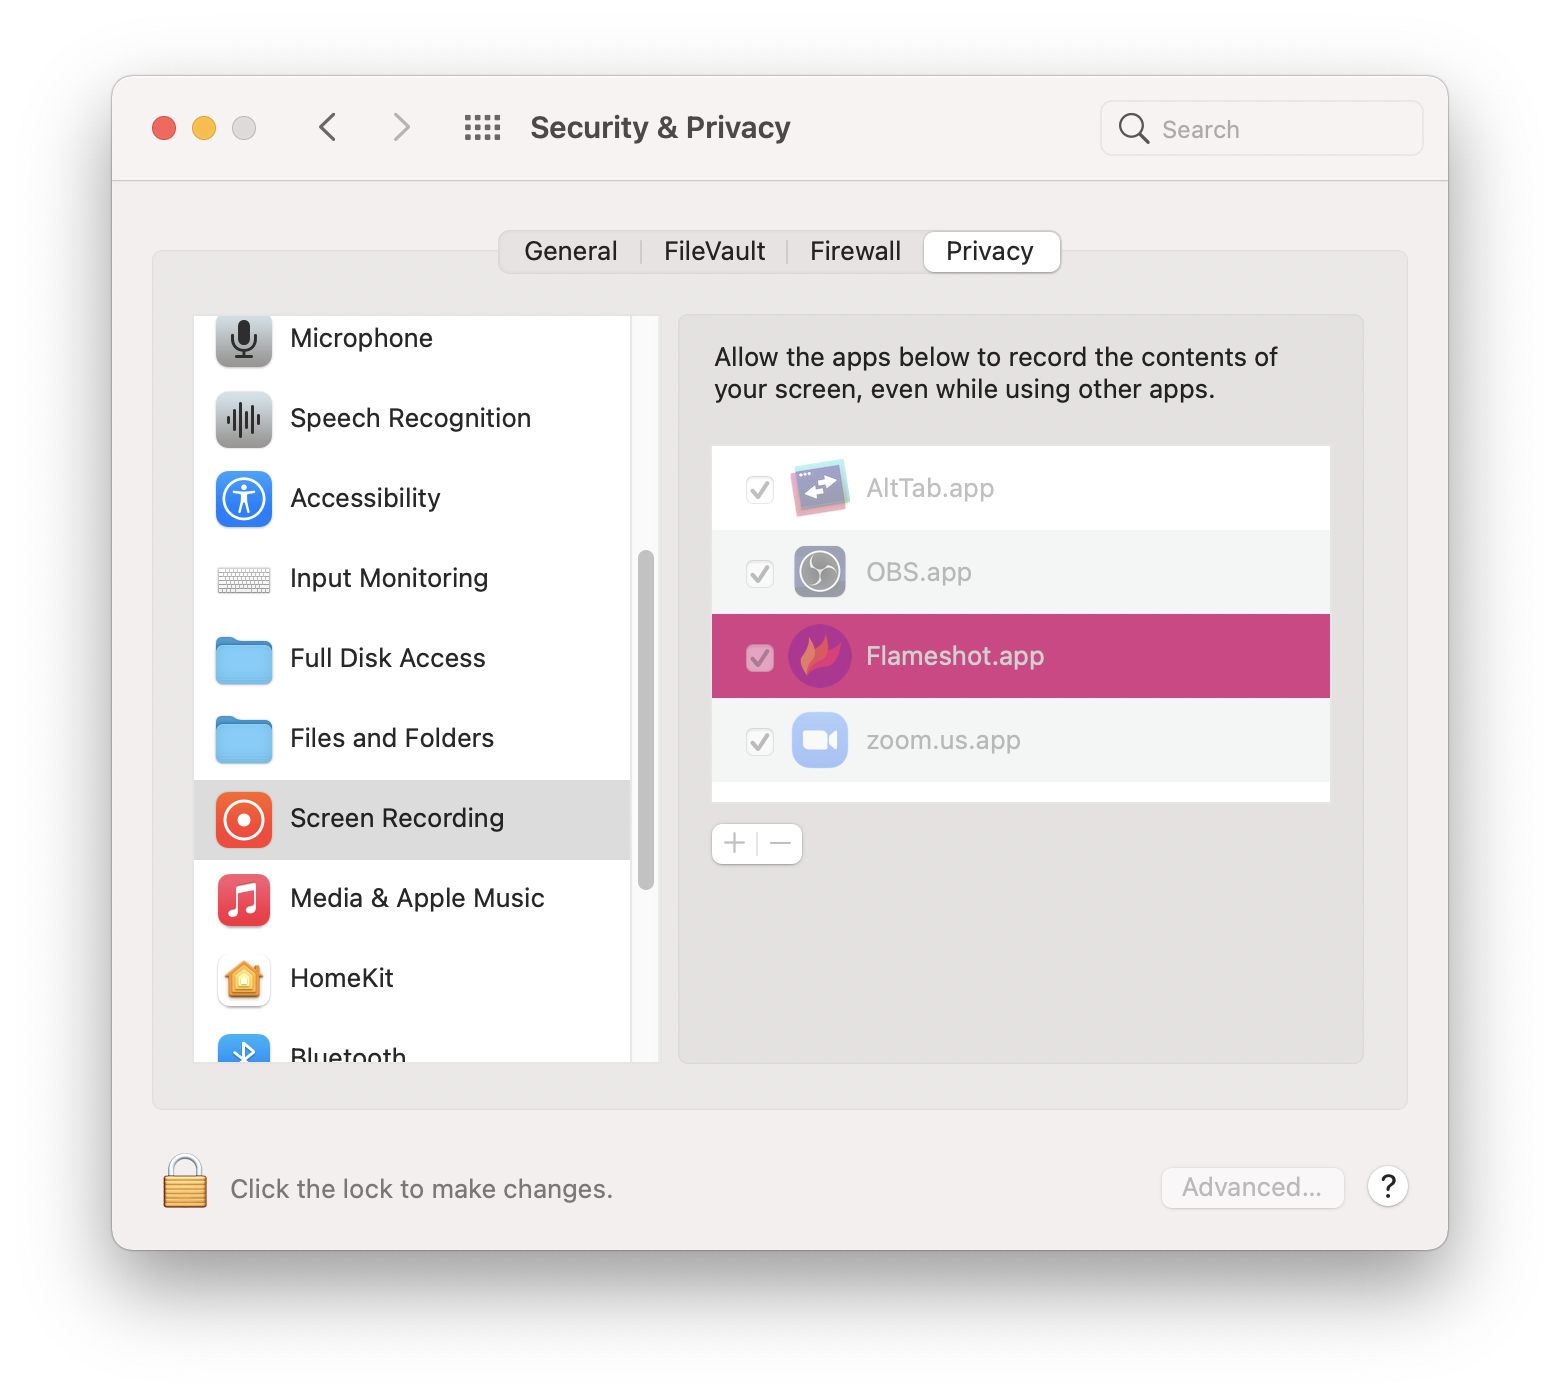 A picture of the macOS Security & Privacy settings that shows the Flameshot should be added to the list in the "privacy" tab